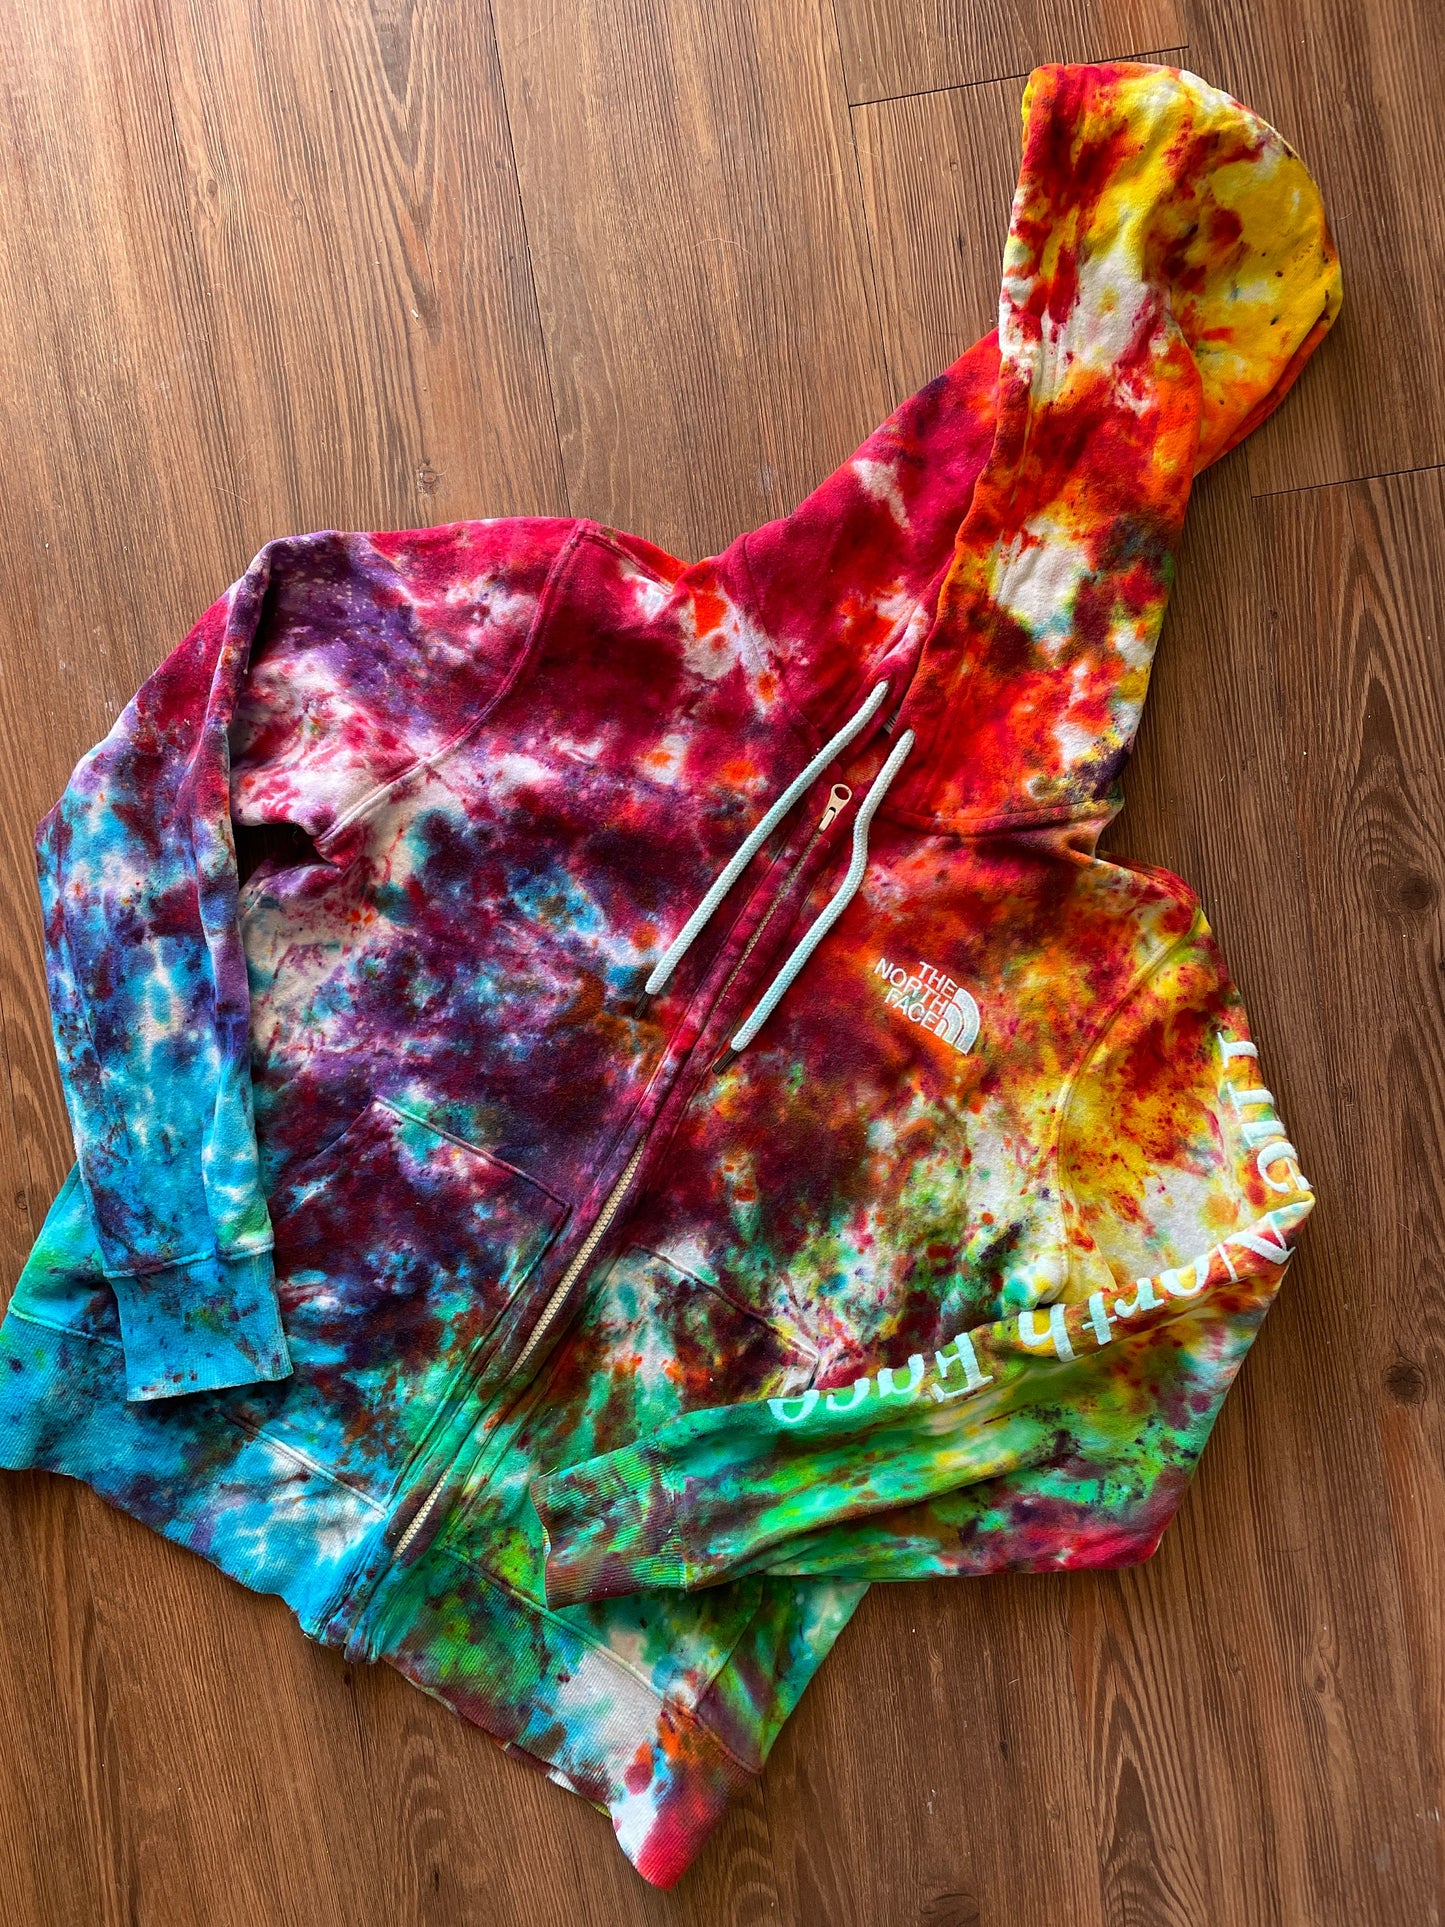 The North Face Rainbow Ice Dye Zip-Up Hoodie | Upcycled Long Sleeve Top | Women's Size Medium | Handmade & Thrifted